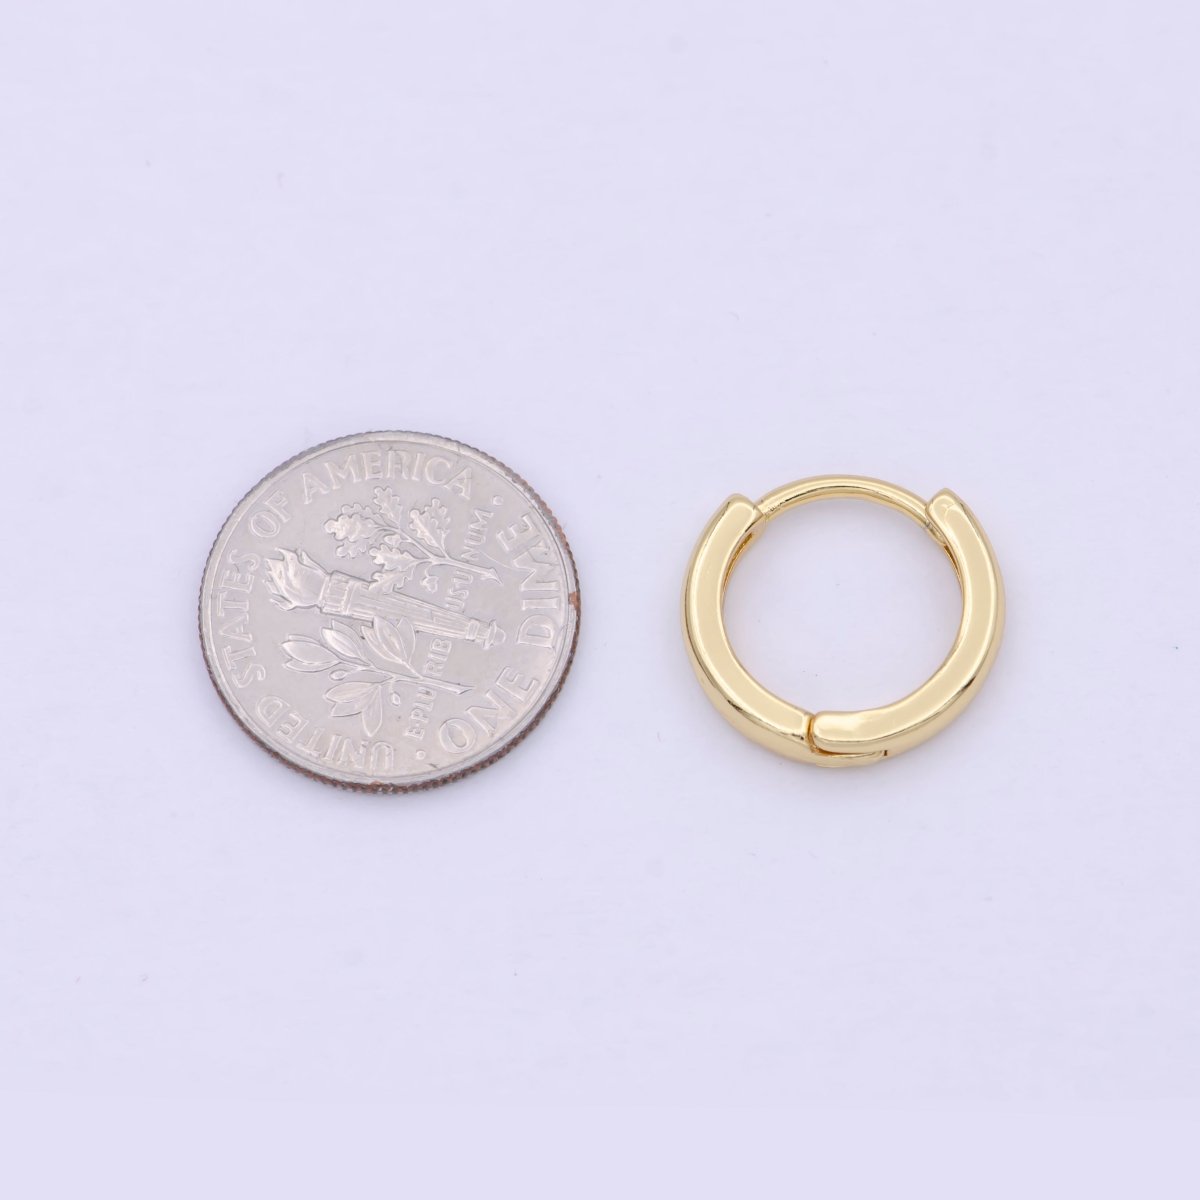 Tiny Gold Rounded Huggie Hoop Earrings, Small Hoop Earring, Cartilage Hoop, Huggie Tragus Hoop, Gold Conch Hoop p-244 - DLUXCA